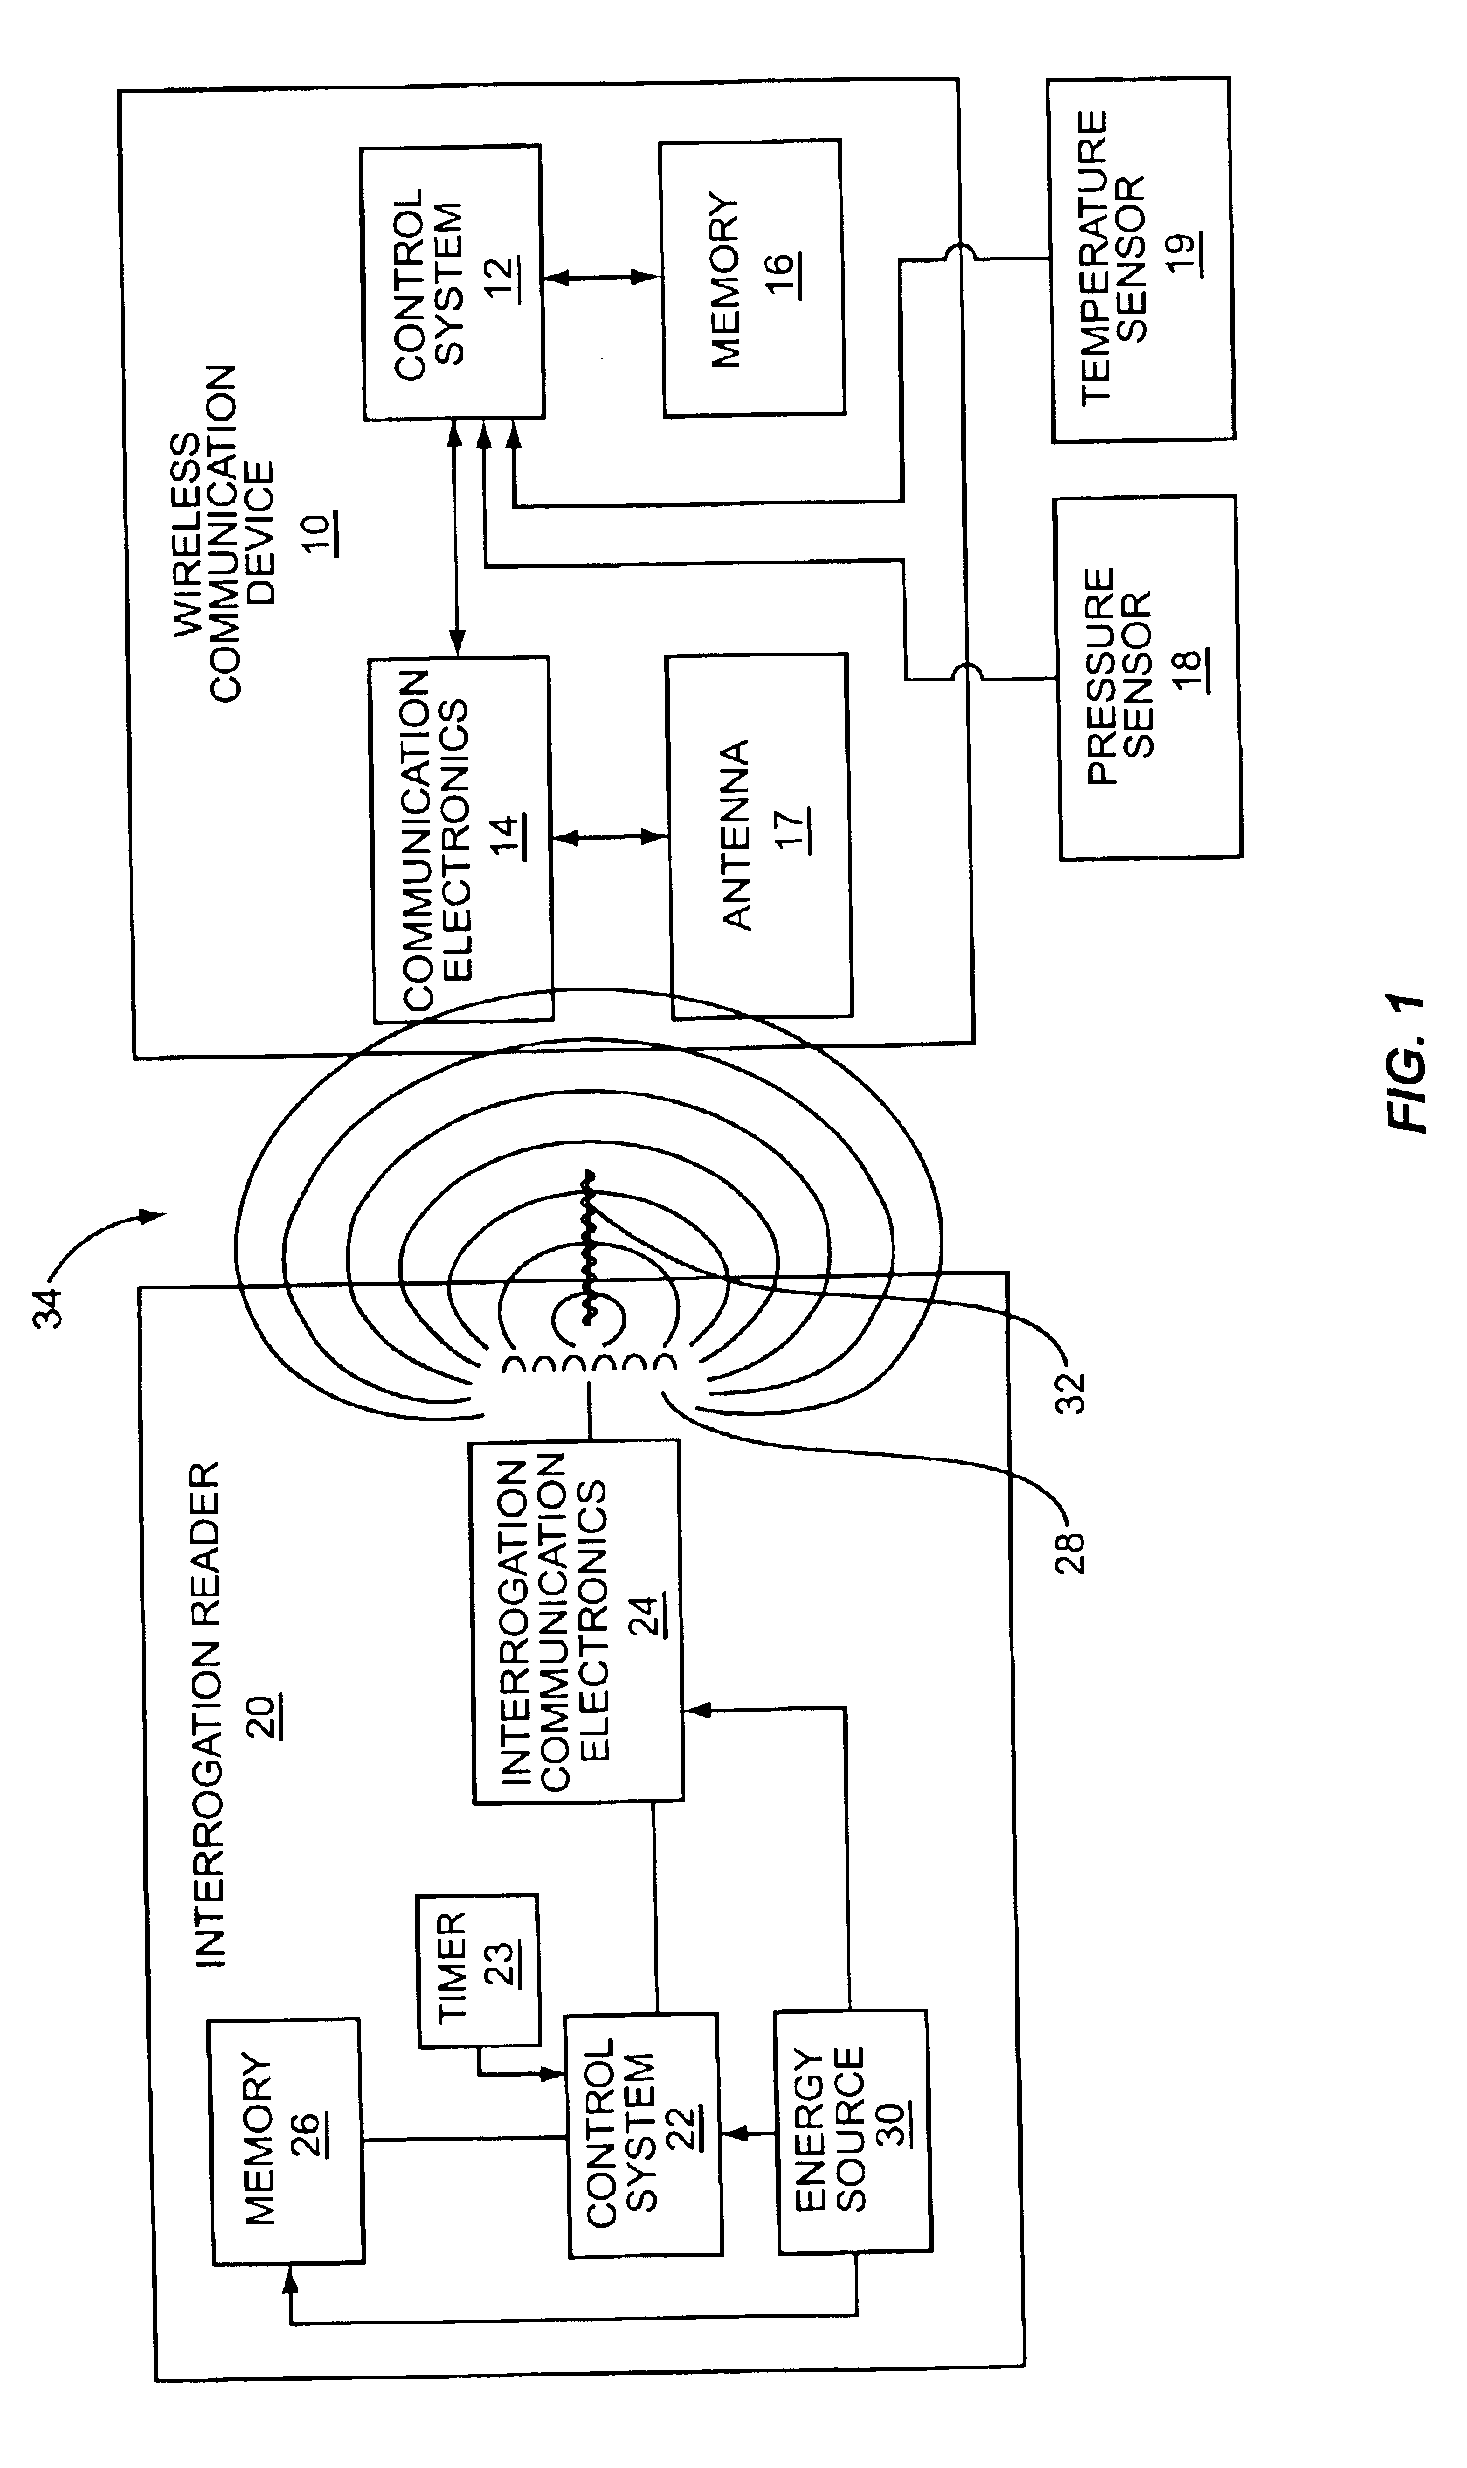 Wave antenna wireless communication device and method